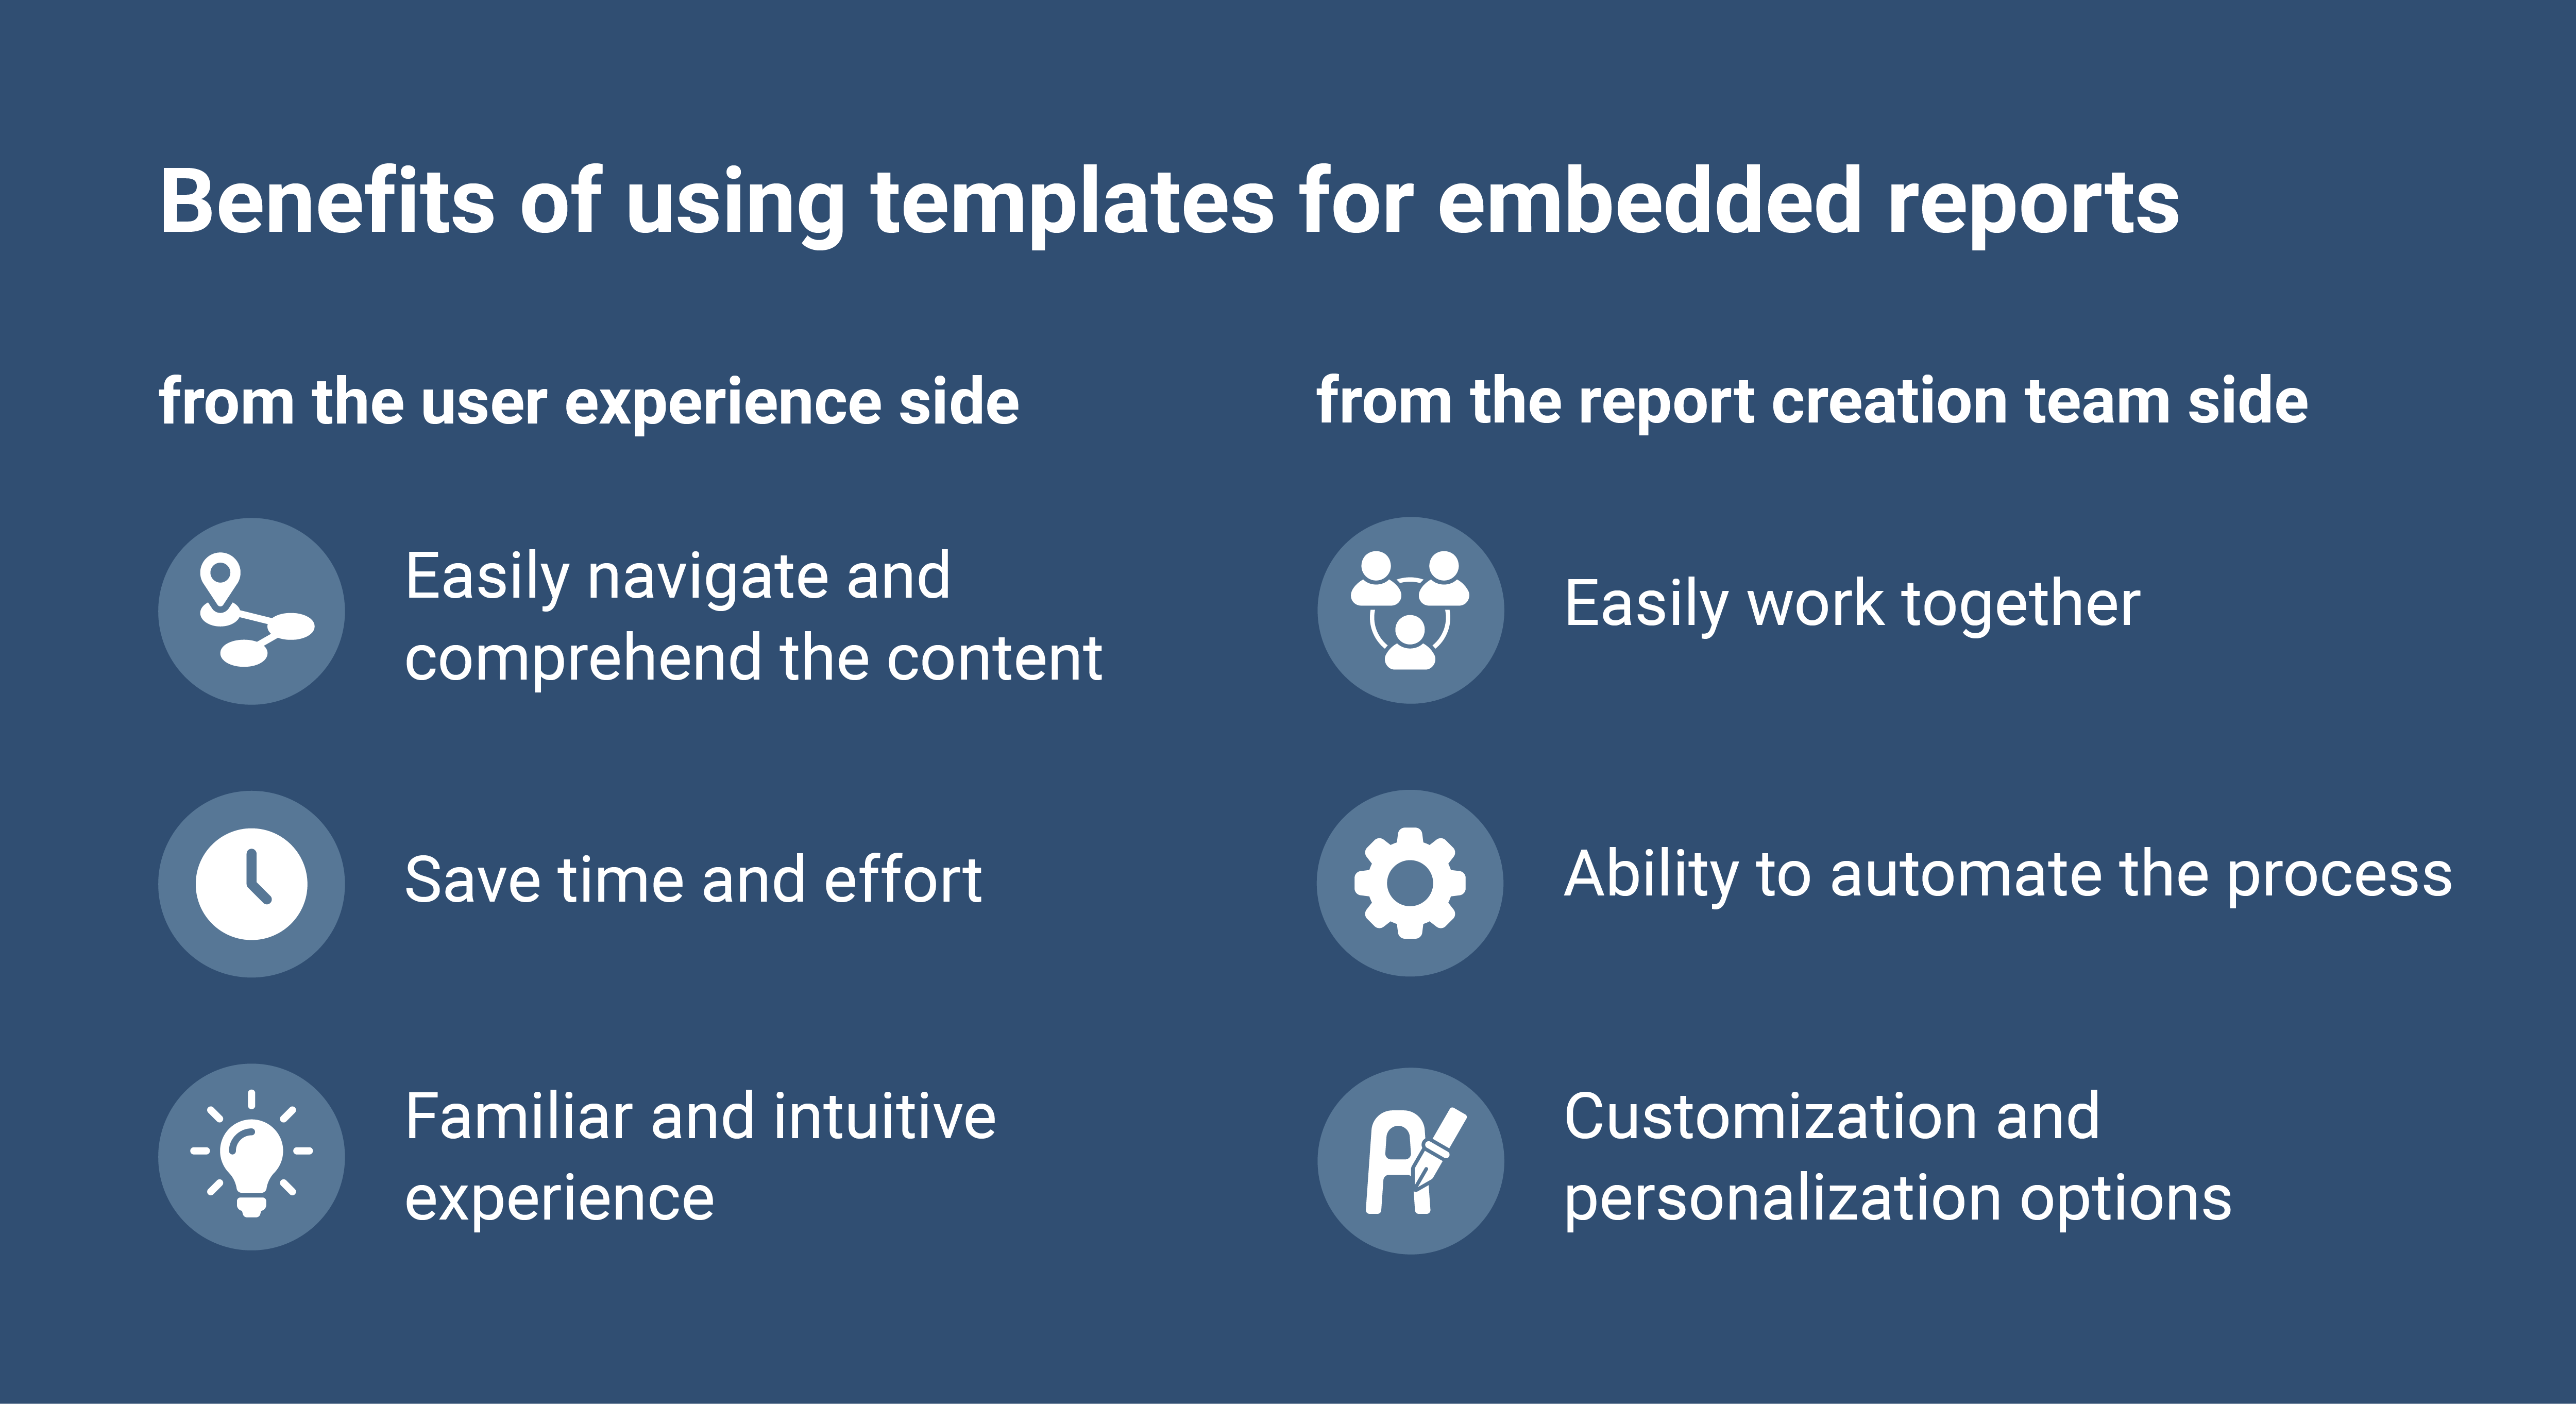 datylon-blog-how-to-use-templates-for-embedded-recurring-reports-blueprintvisuals-2